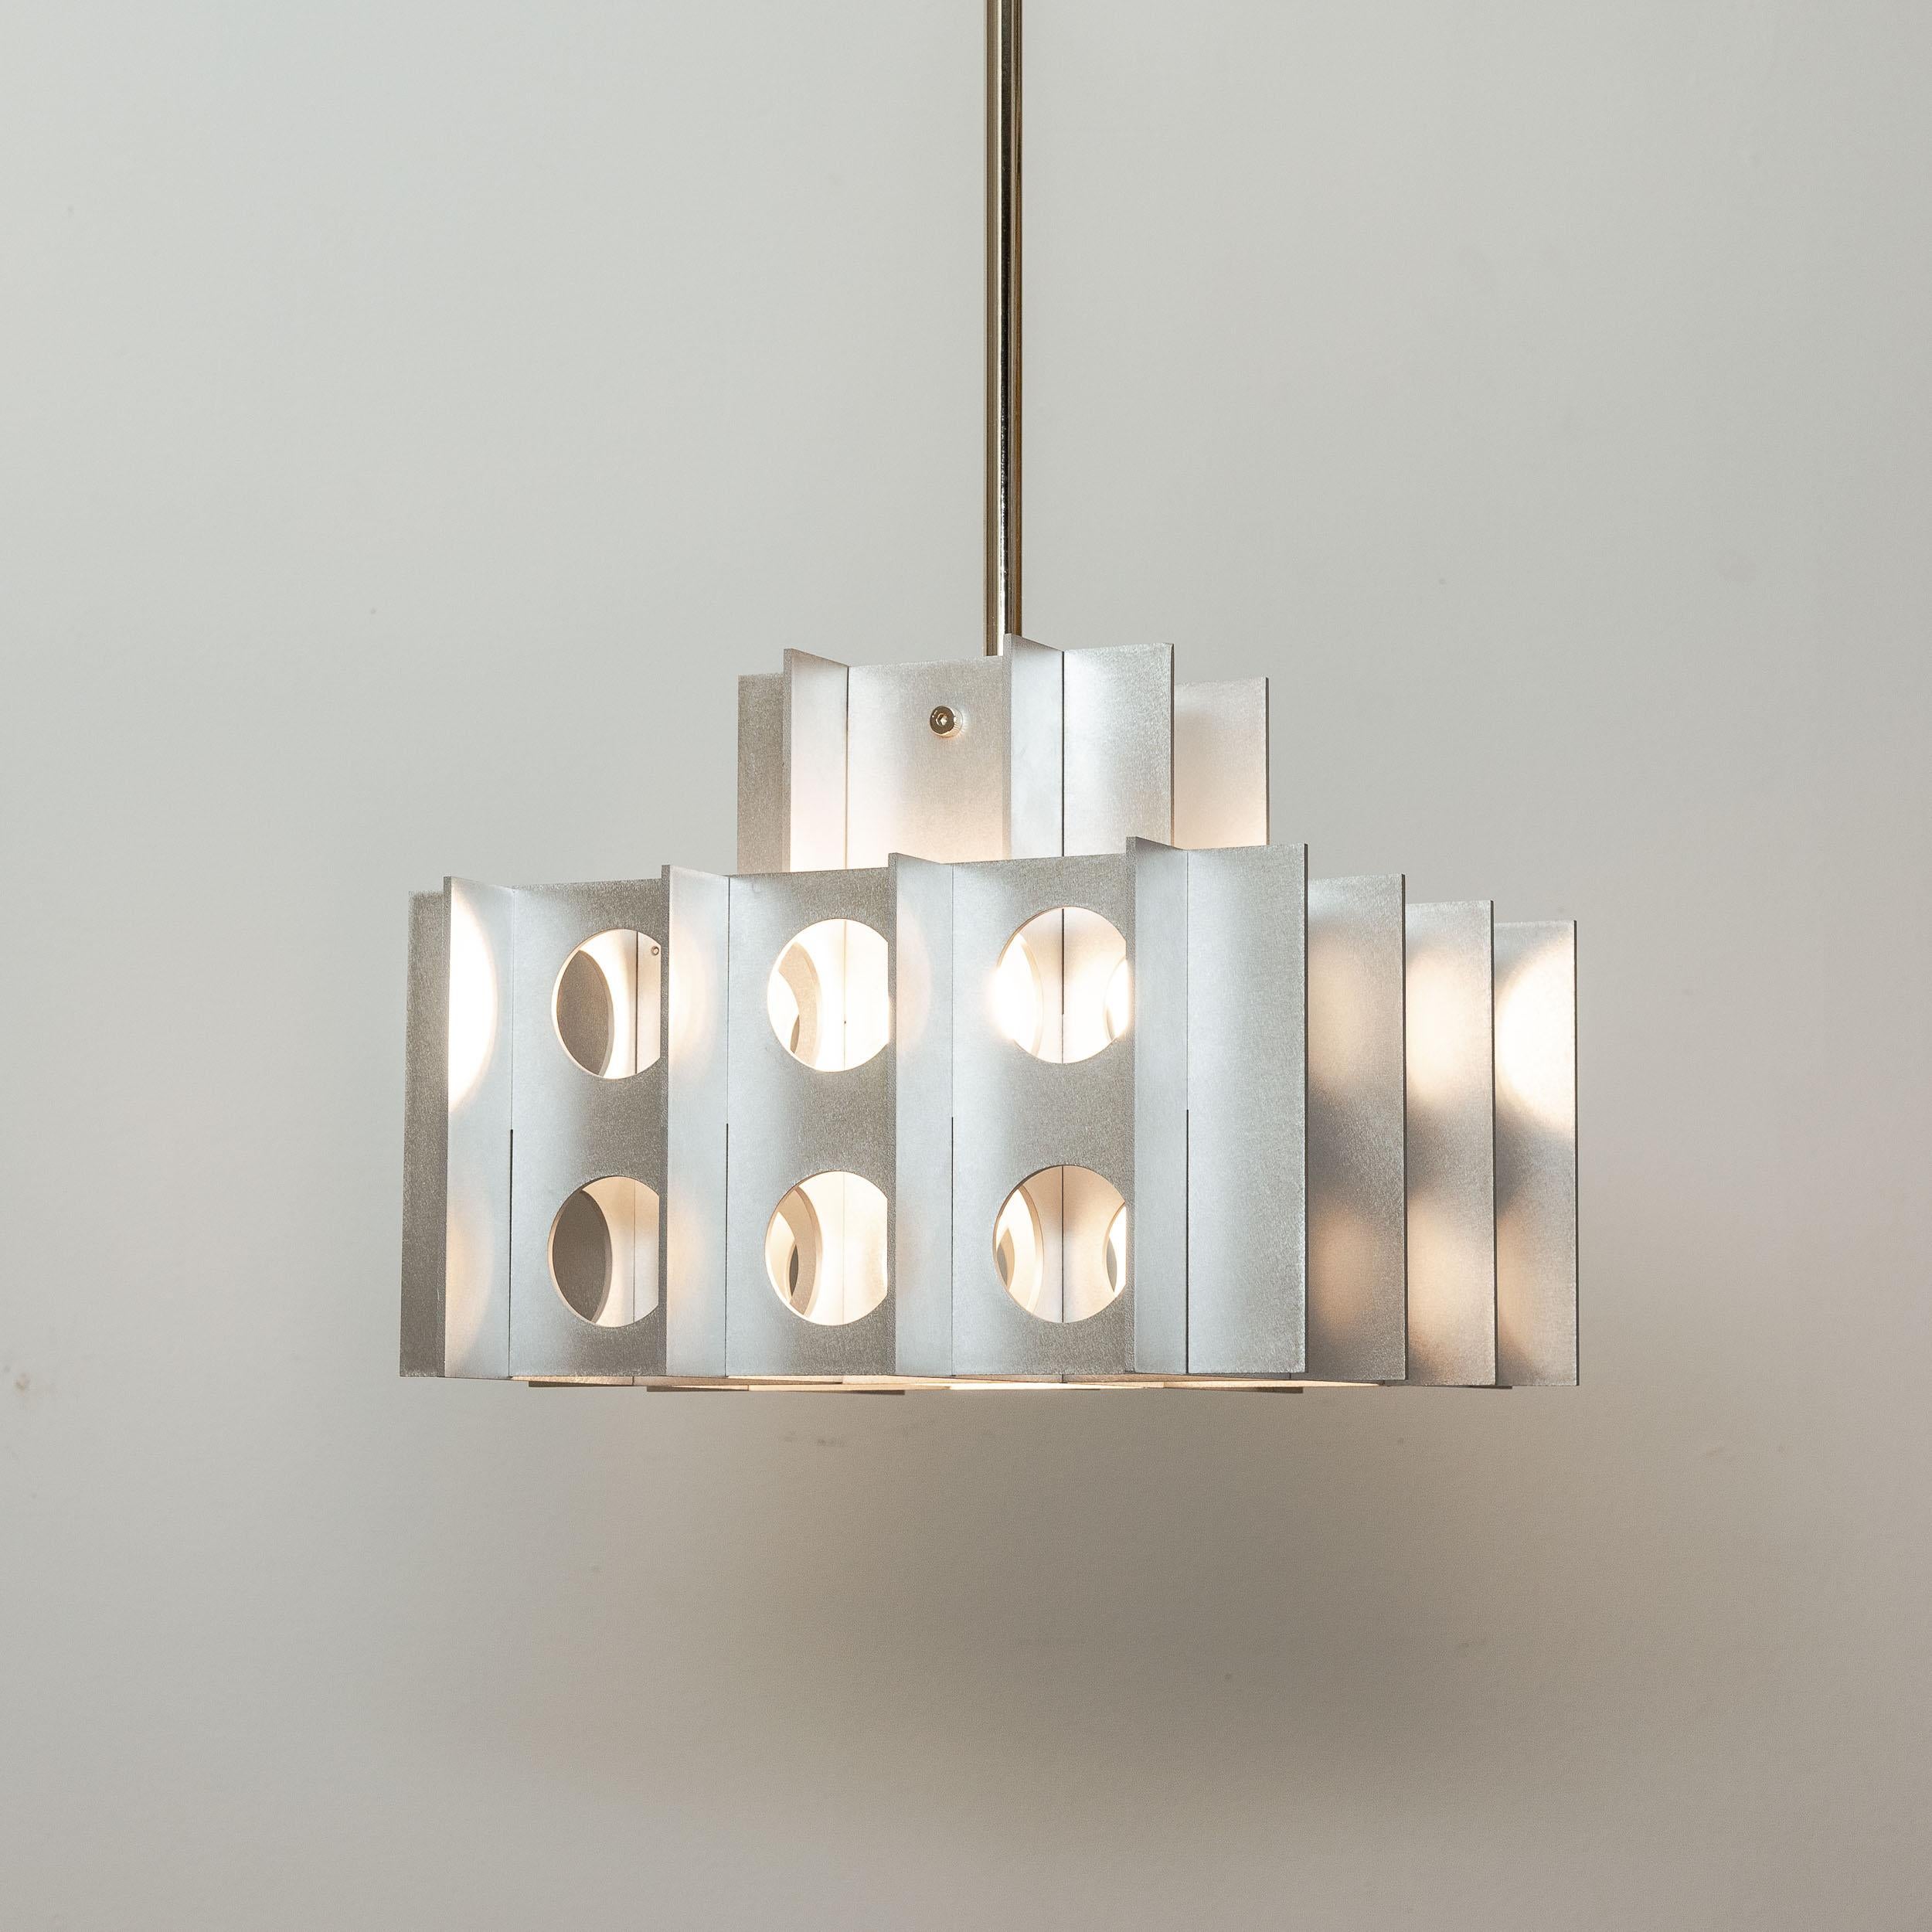 Tenfold Pendant 3TA in Waxed Aluminum by Luft Tanaka Studio

Composed of interlocking sheetmetal panels, the Tenfold Series is inspired by the aesthetics, architectural styles, and art movements of the 1970s. The light fixture works well as a single